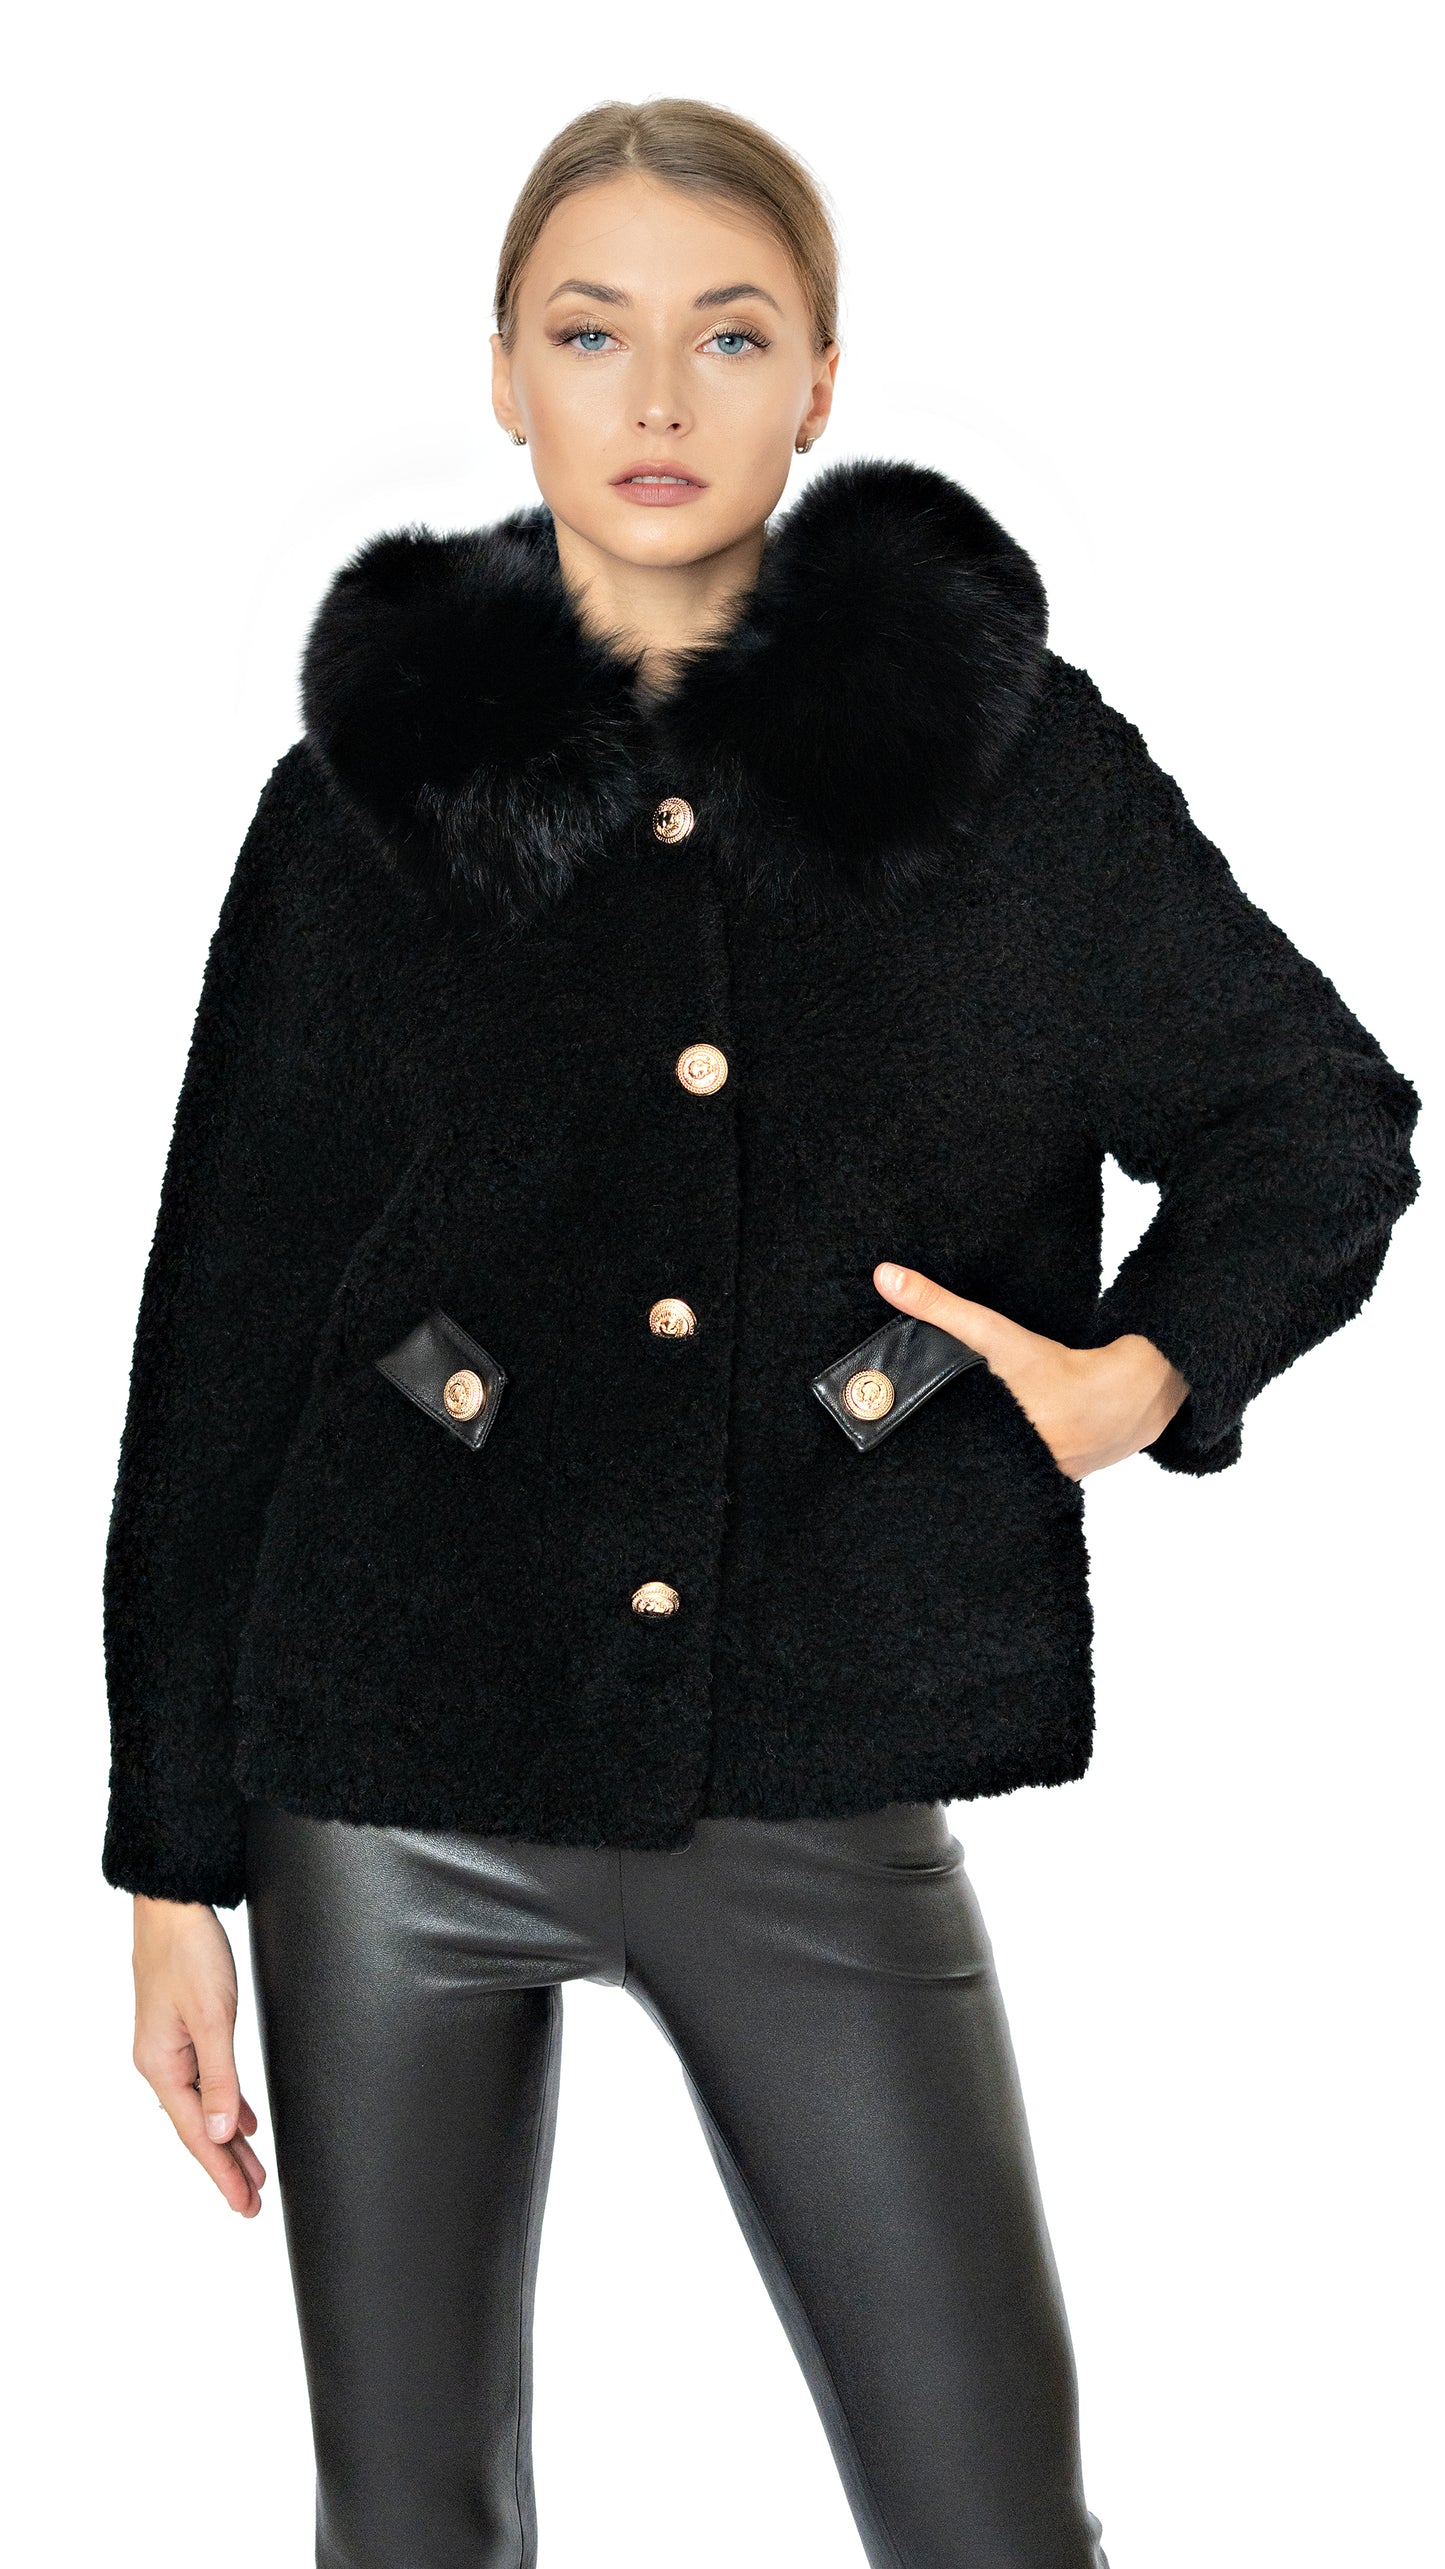 Daniella Erin shearling jacket with gold buttons and fur trimmed hood in black